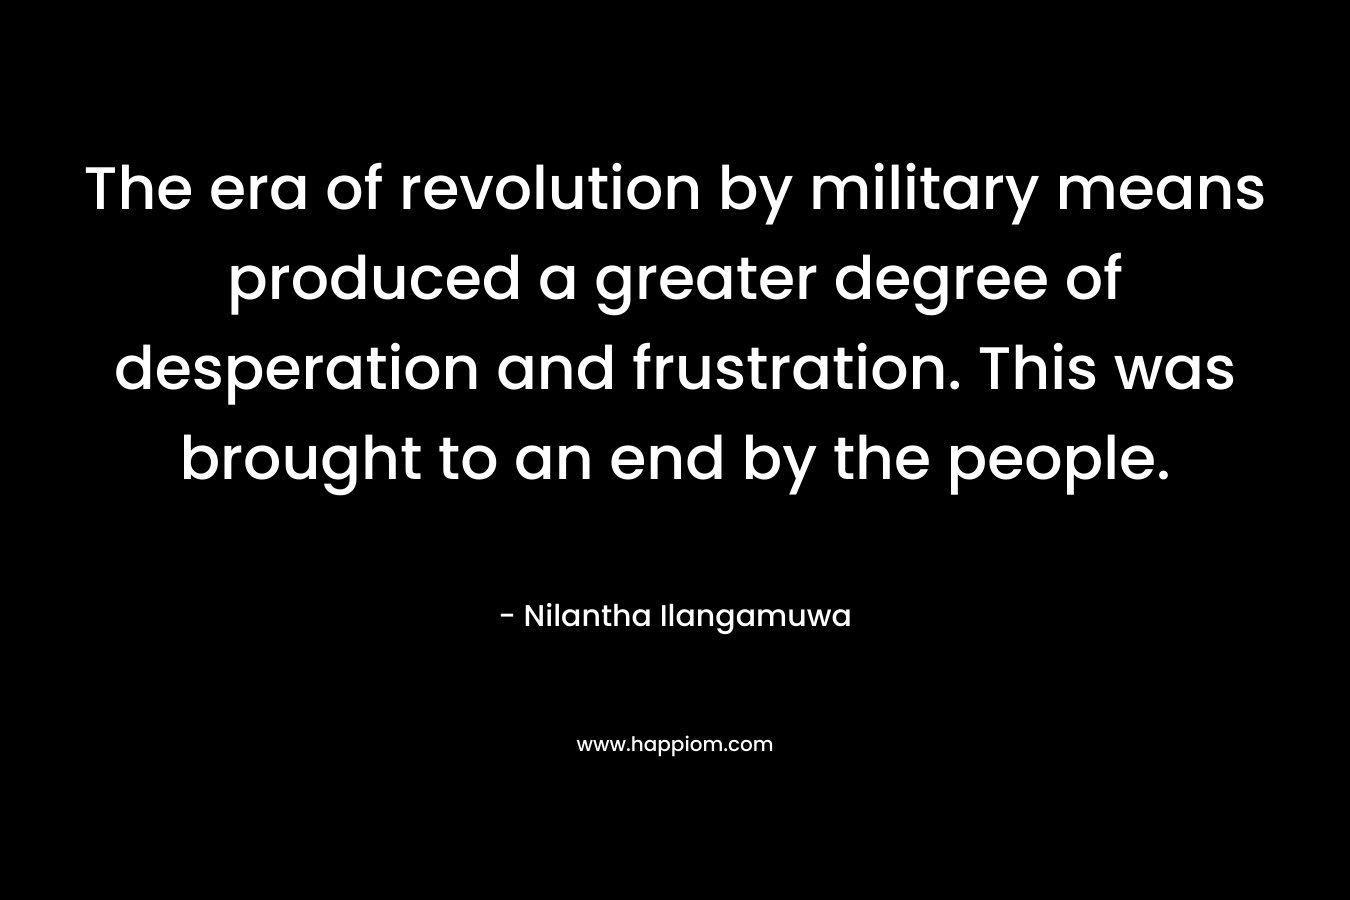 The era of revolution by military means produced a greater degree of desperation and frustration. This was brought to an end by the people.